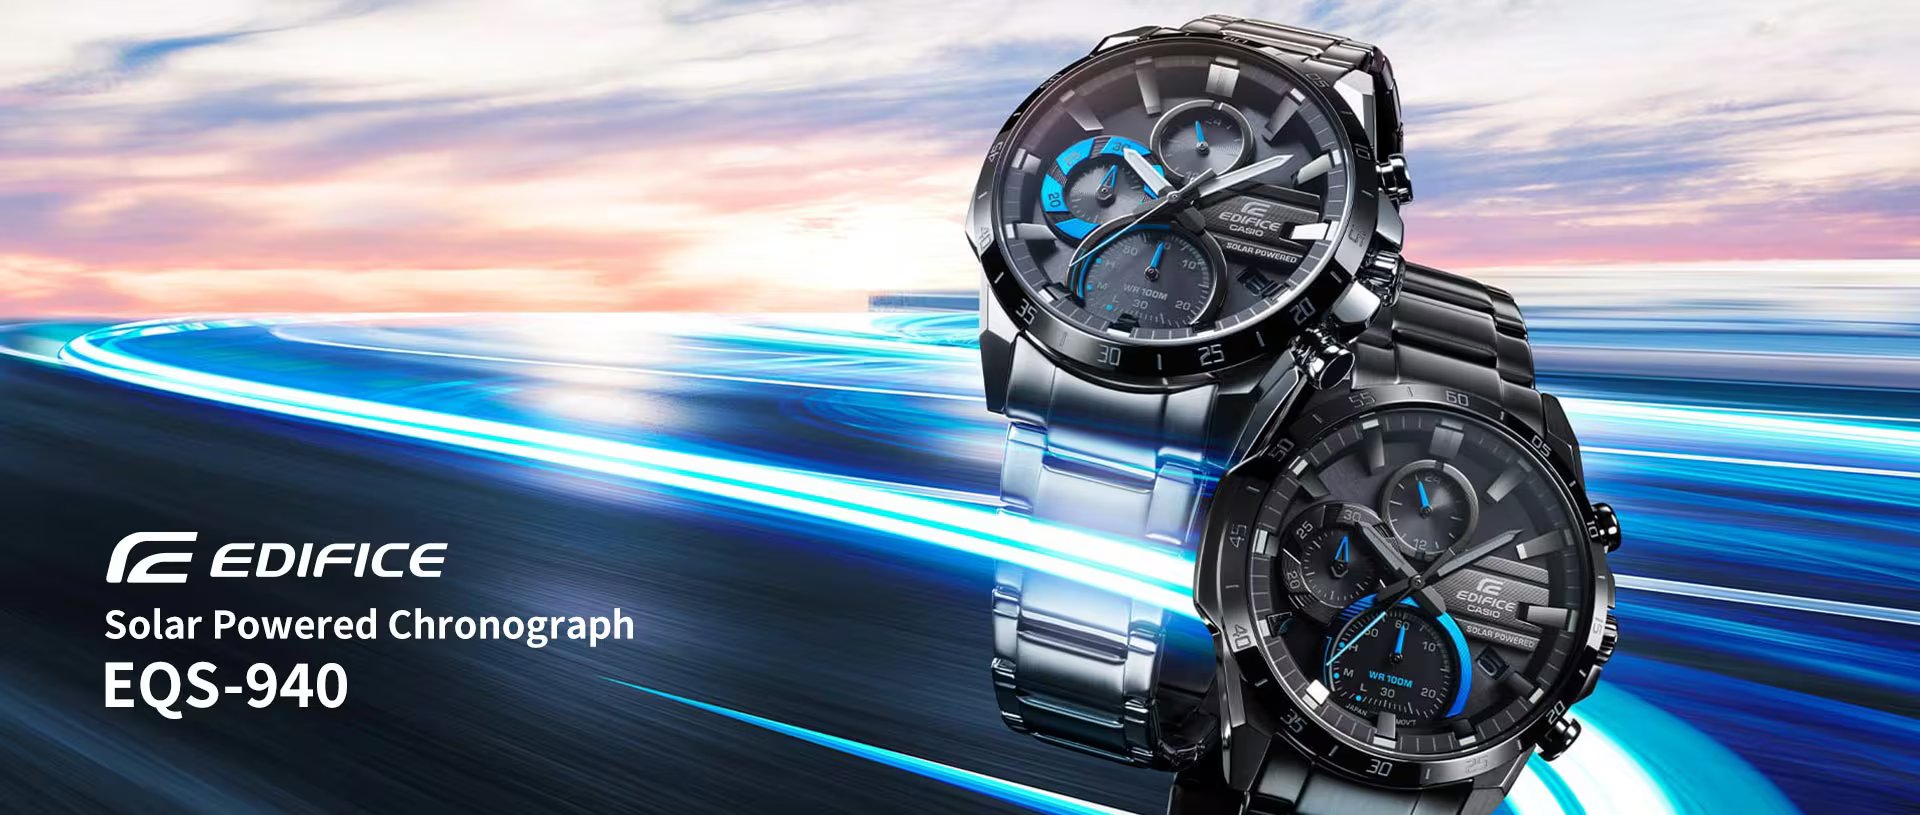 Edifice | Shop Casio Edifice Watches Online | G Life Watches